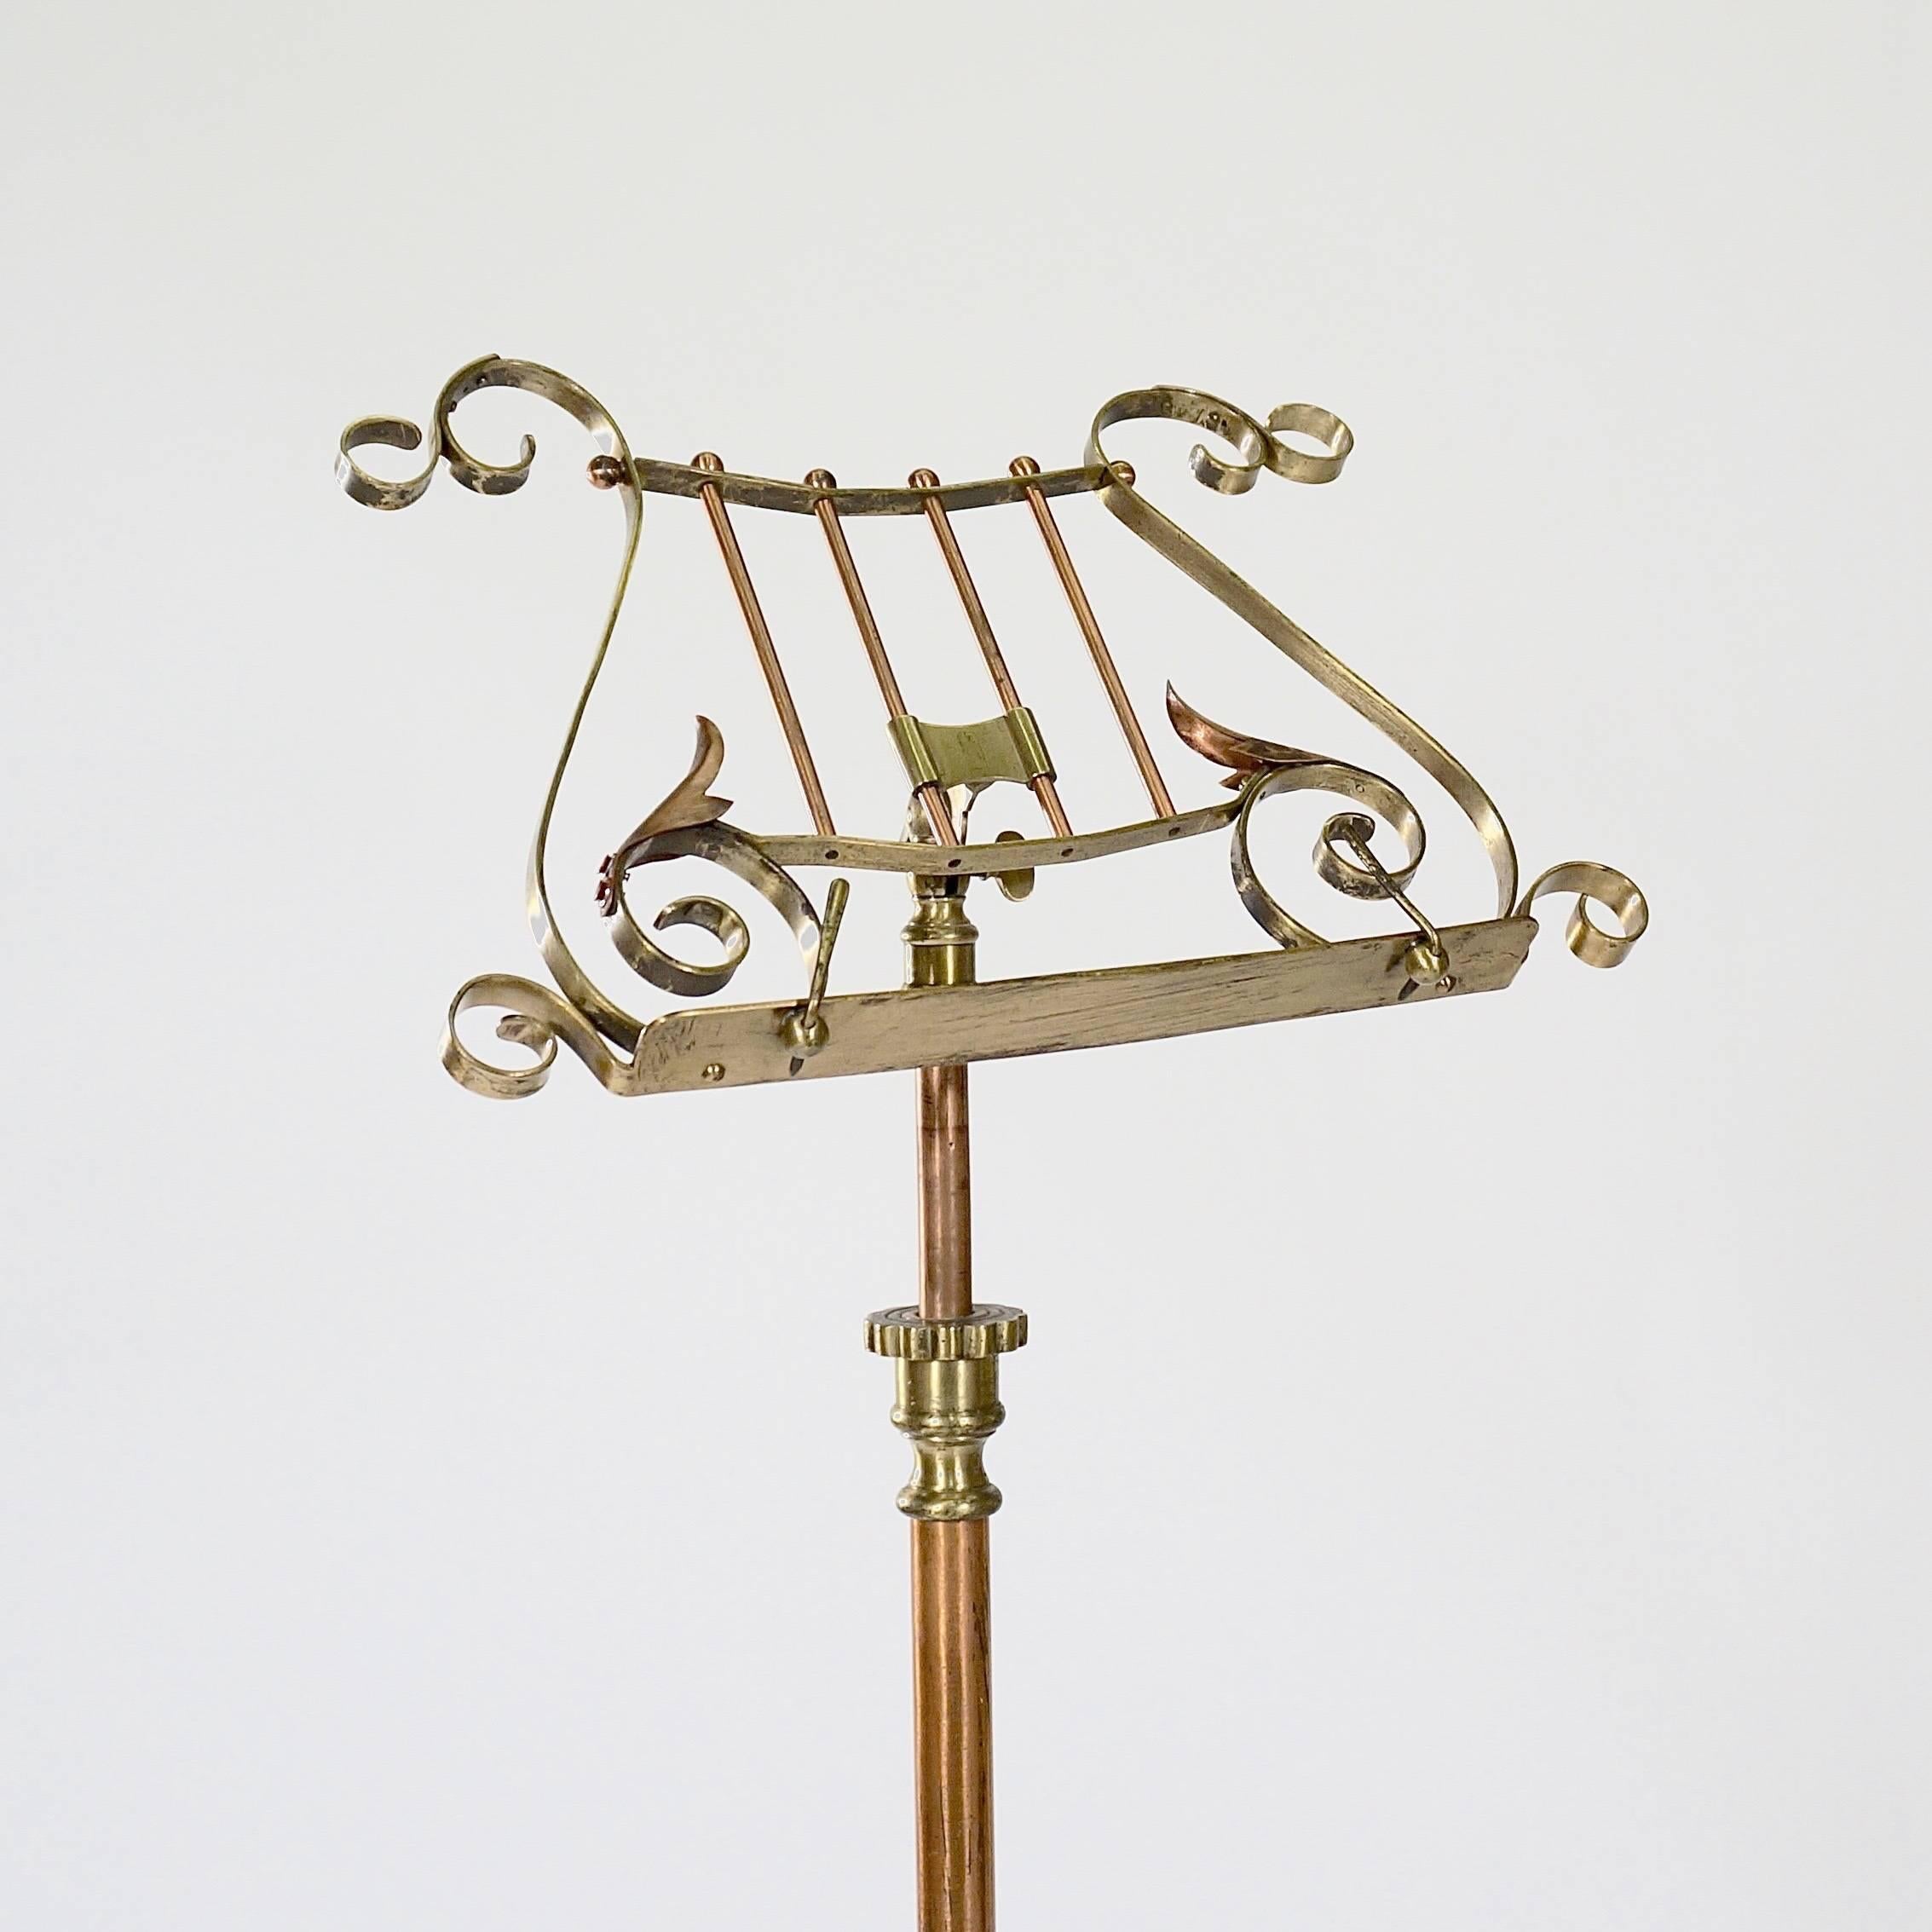 A brass and copper height adjustable music stand.

Extended height: 154cm.

England, circa 1870s.